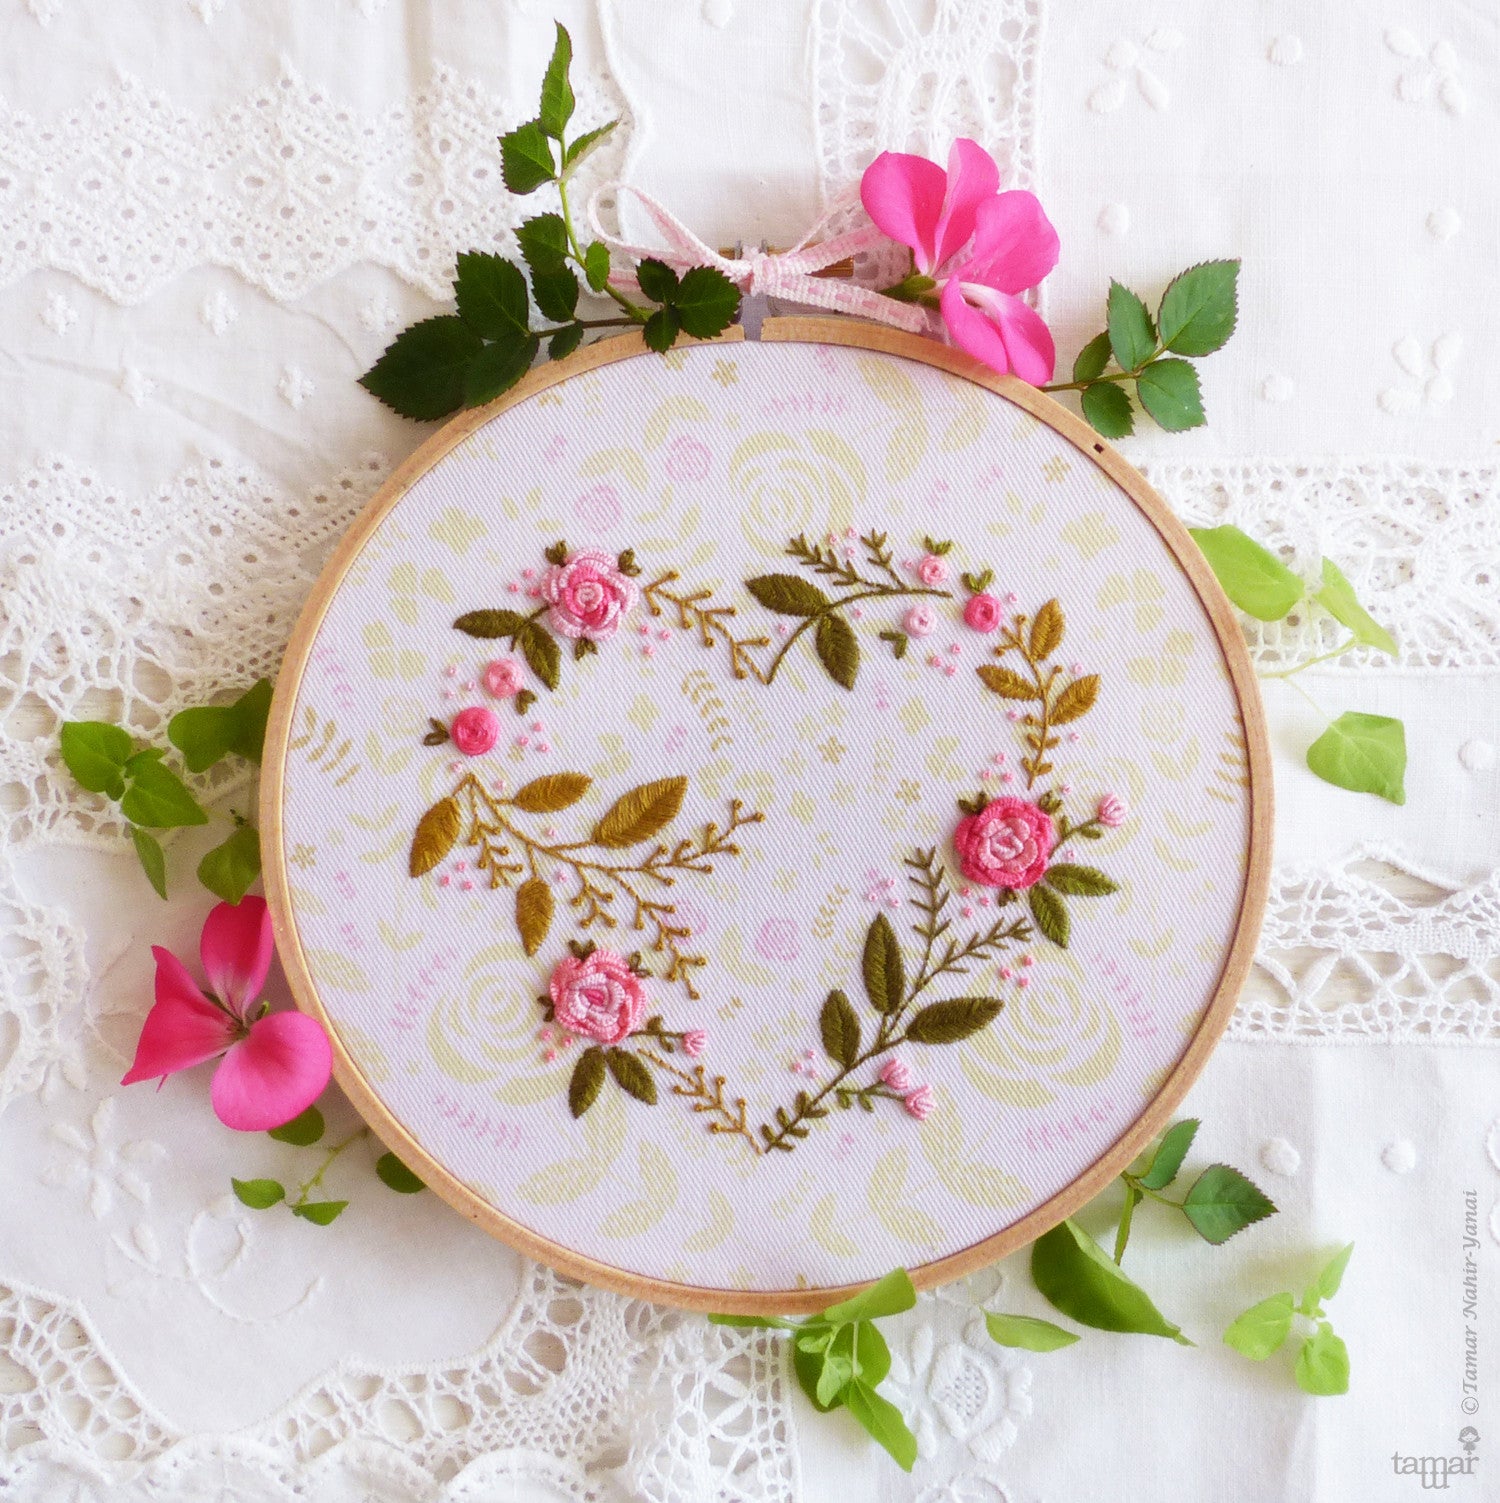 easy-to-use diy embroidery kit flower pattern